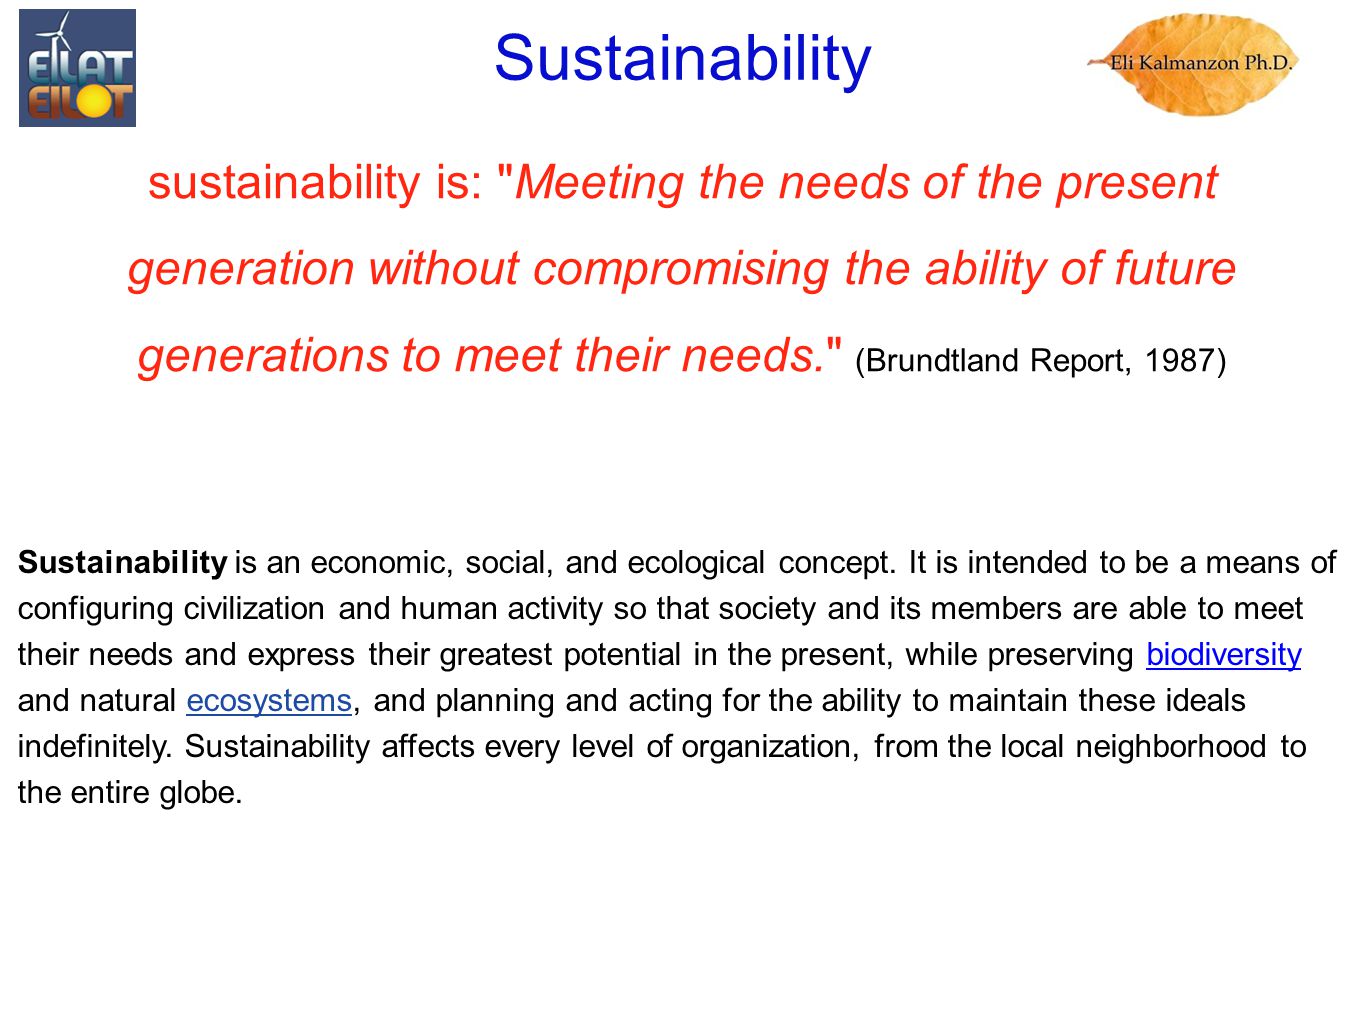 Sustainability sustainability is: Meeting the needs of the present generation without compromising the ability of future generations to meet their needs. (Brundtland Report, 1987) Sustainability is an economic, social, and ecological concept.